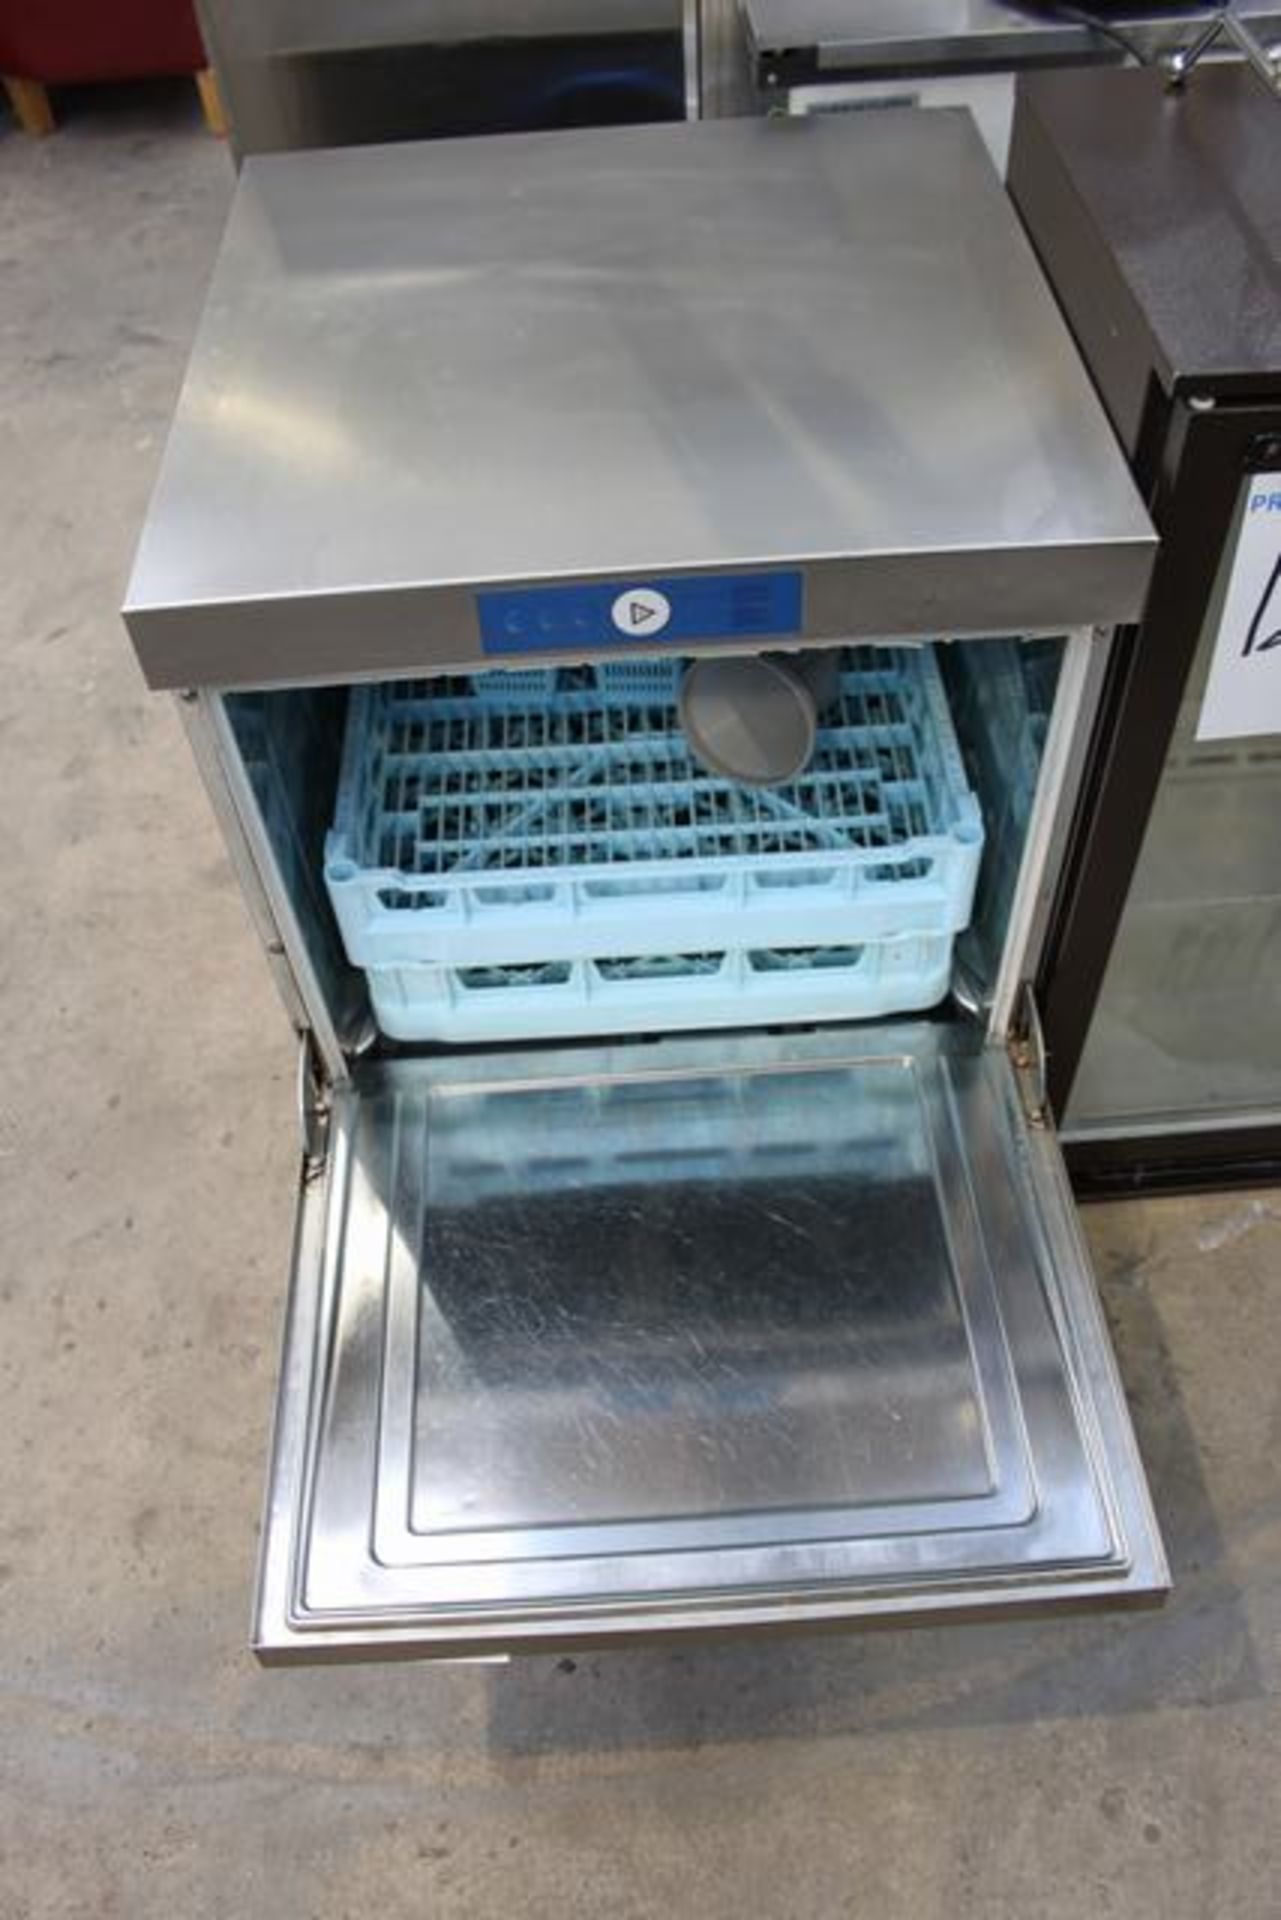 Hobart FXS -70N under counter dishwasher 20 racks per hour variable cycle times of 180, 240 or 300 - Image 2 of 2